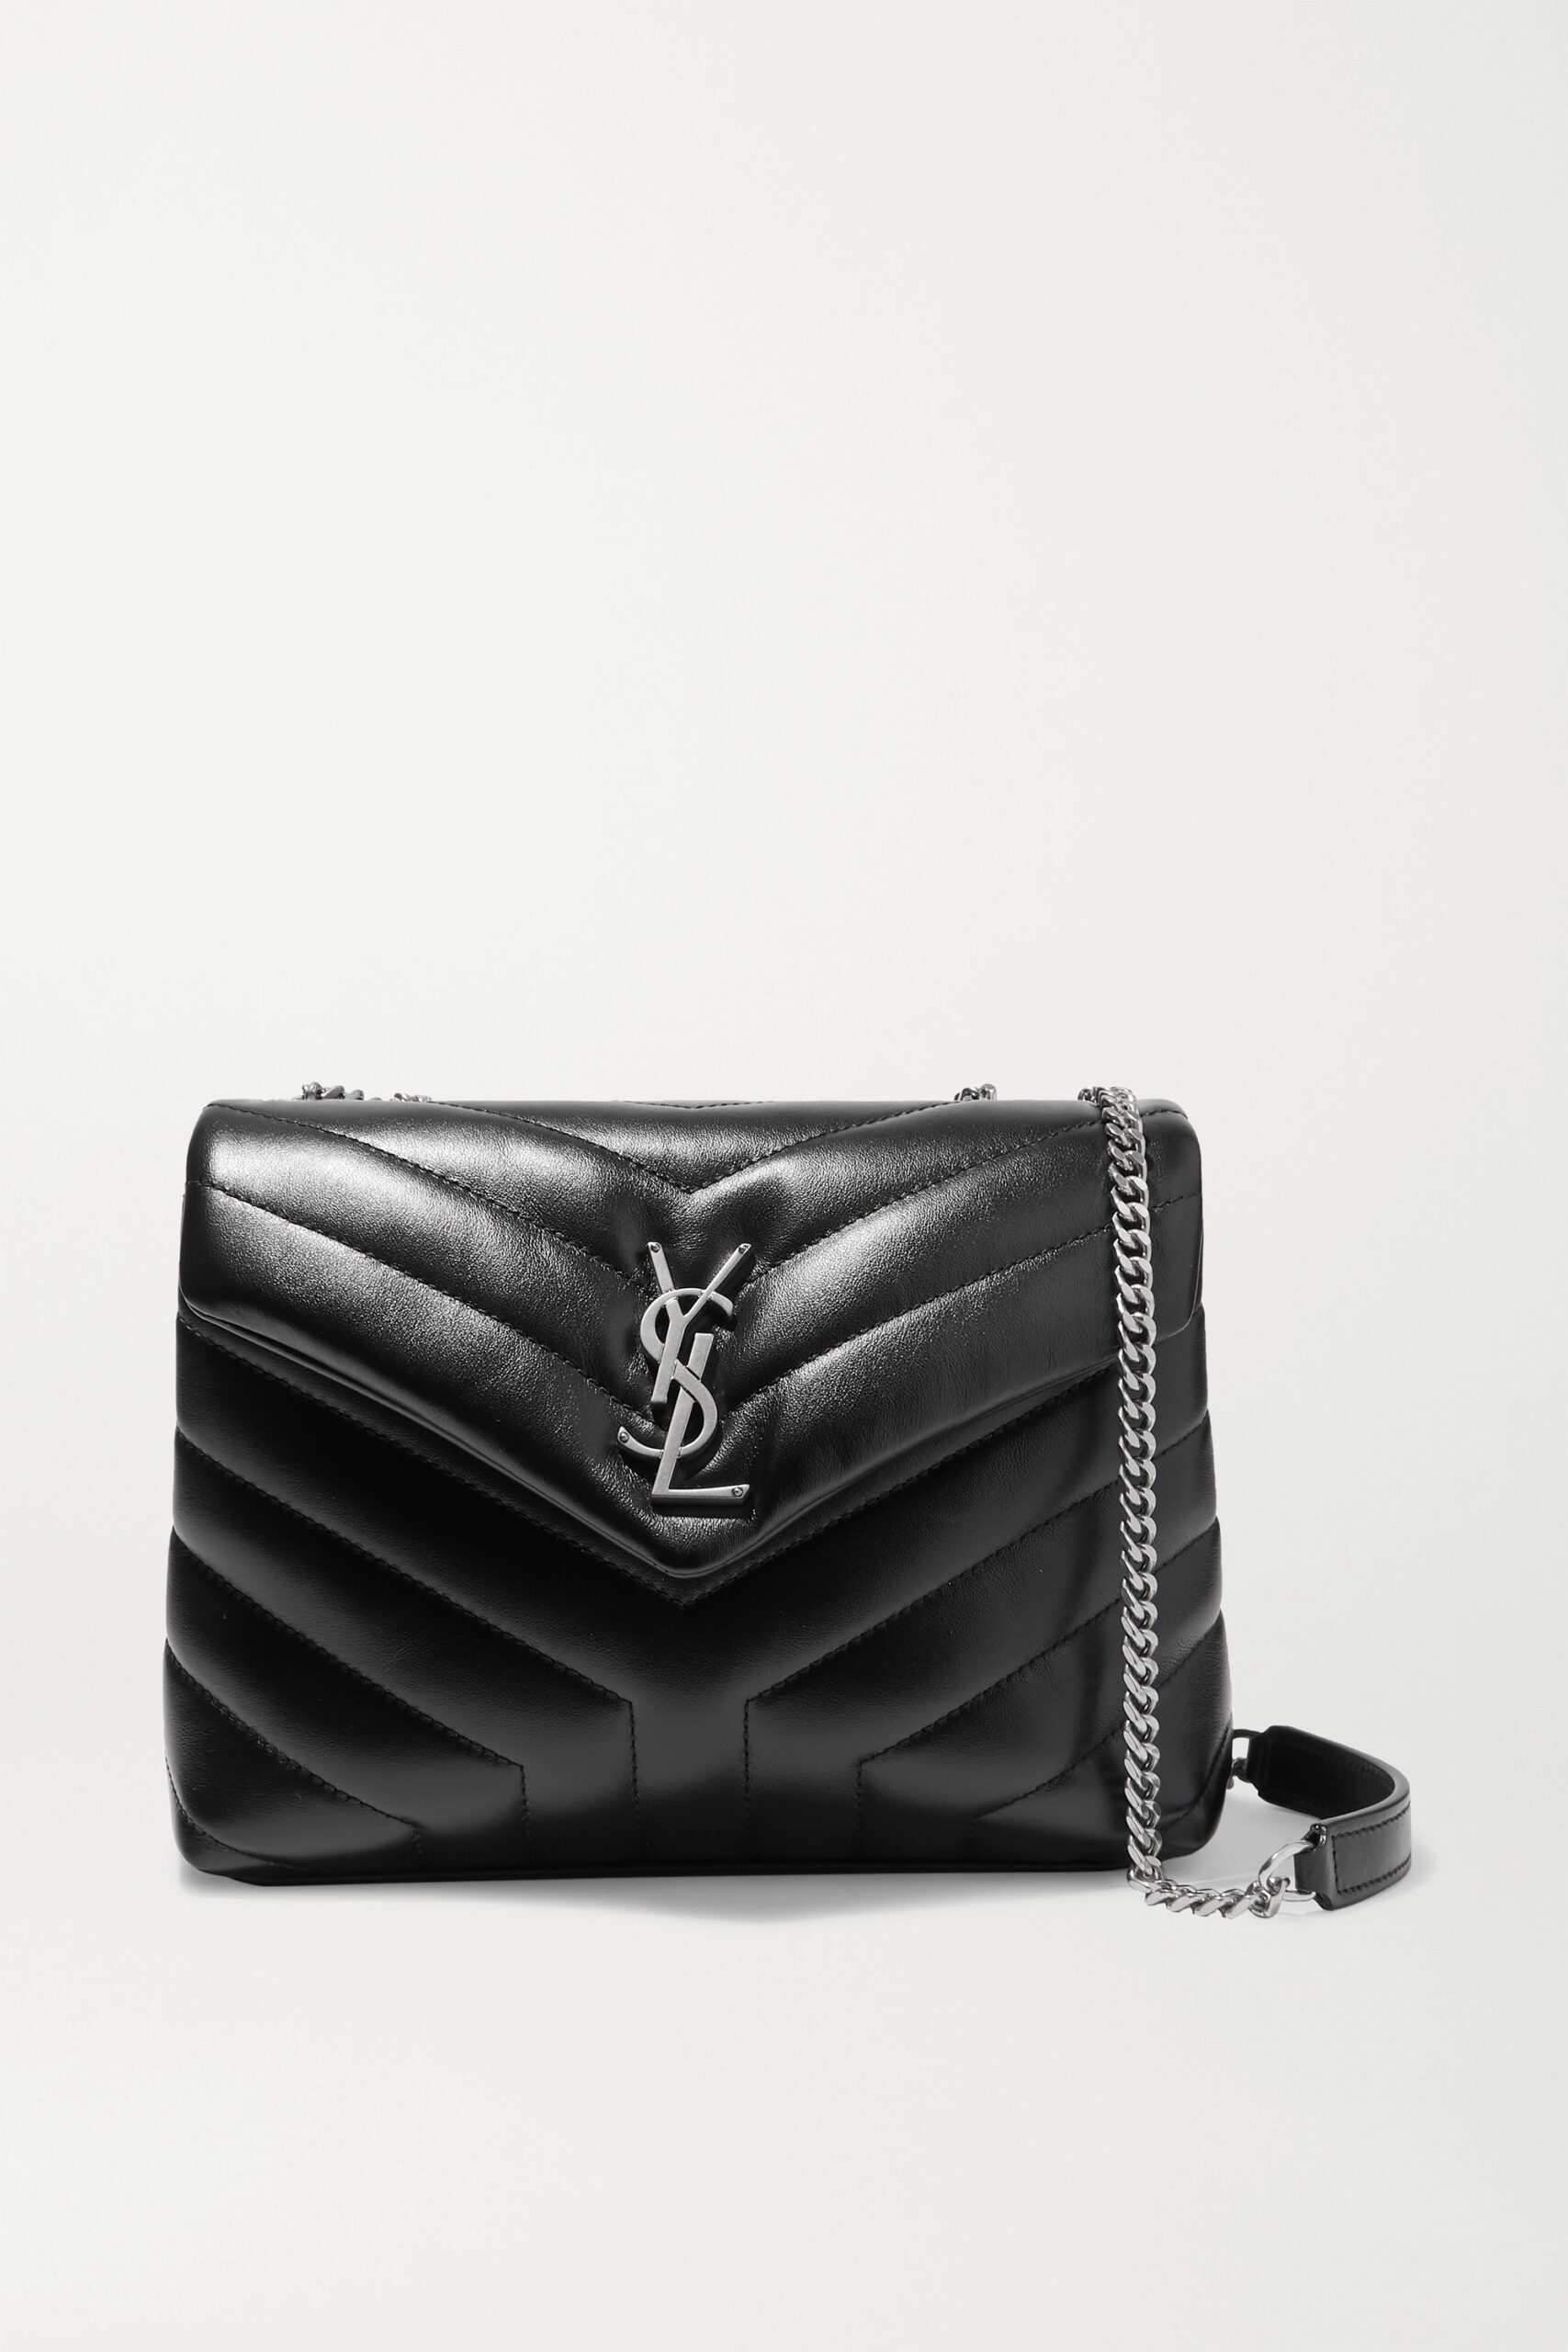 SAINT LAURENT Loulou Puffer small quilted leather shoulder bag -  lushenticbags